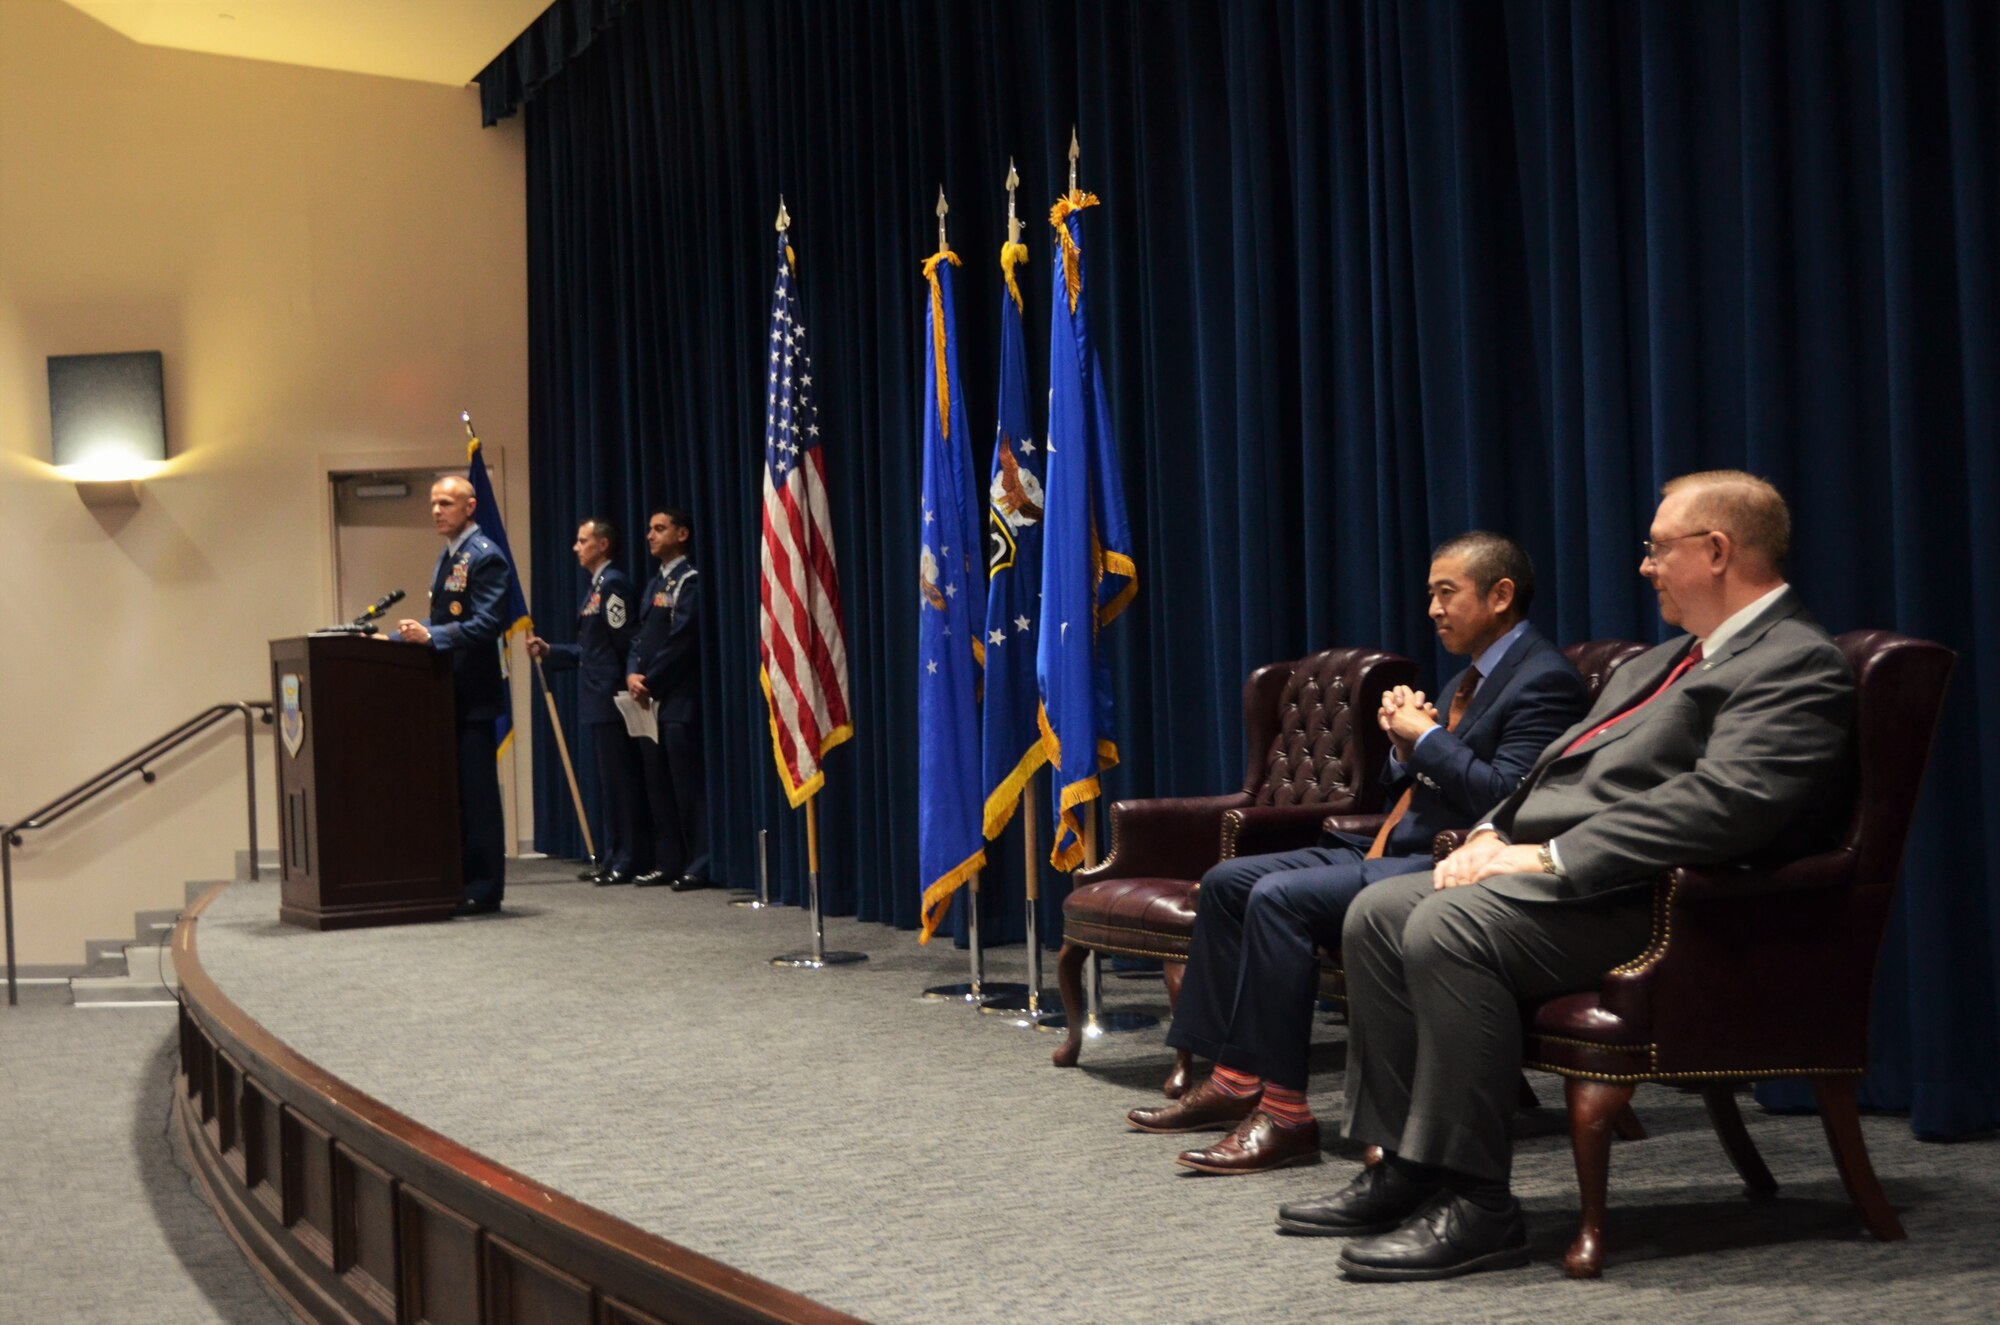 Maj. Gen. Bradley D. Spacy, Commander, AFIMSC addresses the audience during the change of leadership ceremony for the Air Force Civil Engineer Center at Lackland Air Force Base, Texas, Oct. 29, 2018.